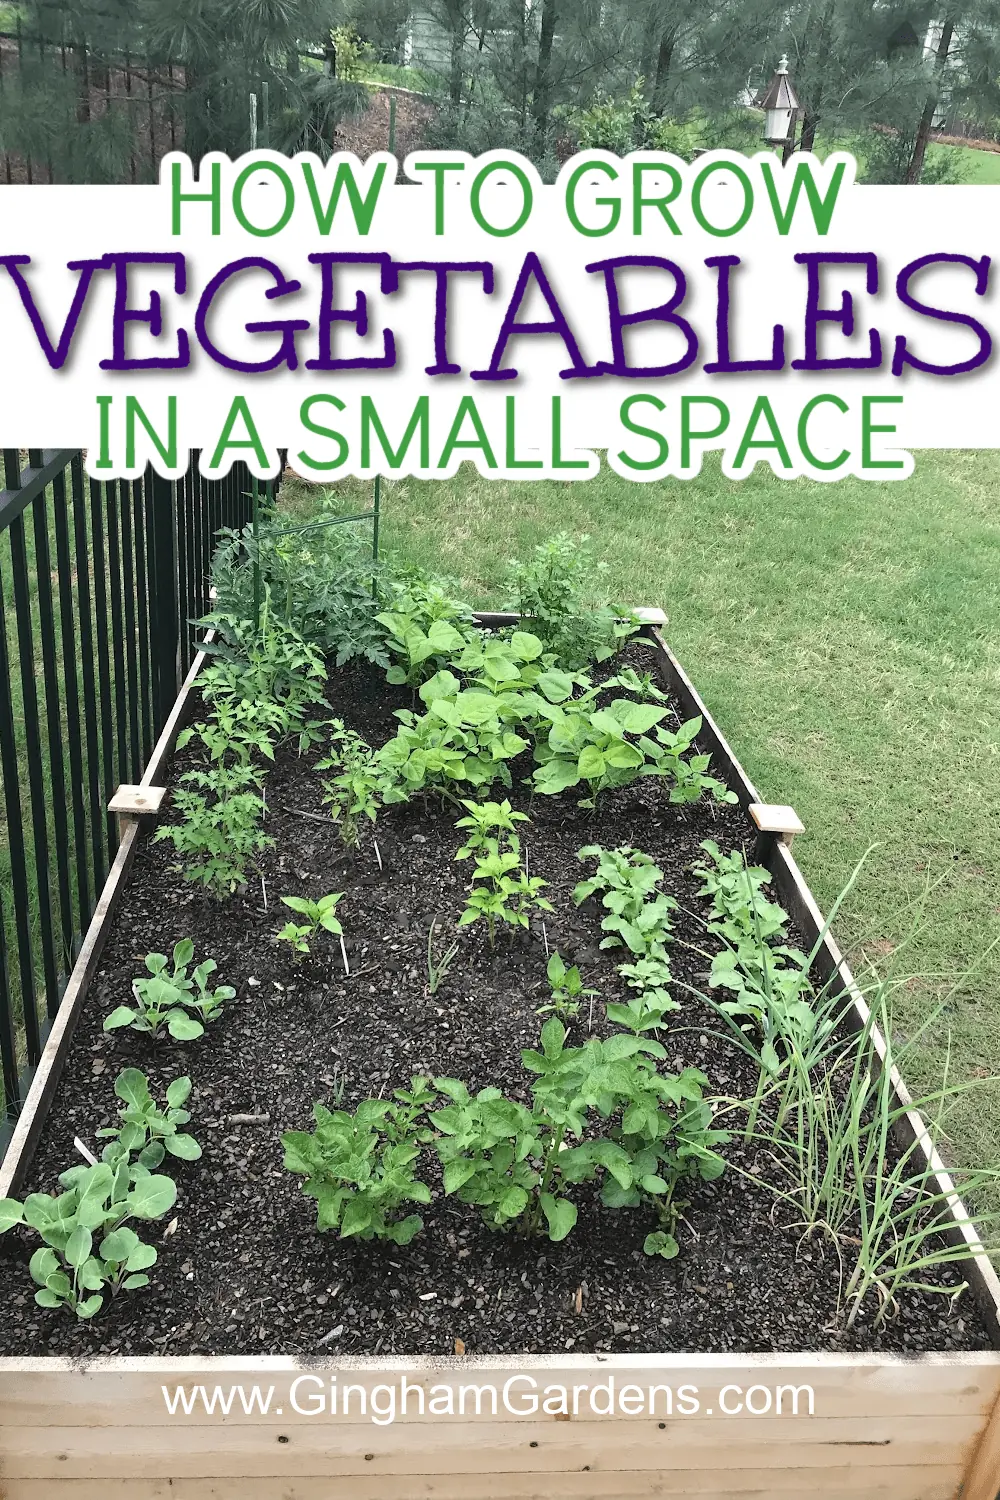 Easy-to-Grow Vegetables in Grow Bags: Perfect for Small Spaces – UrbanMali